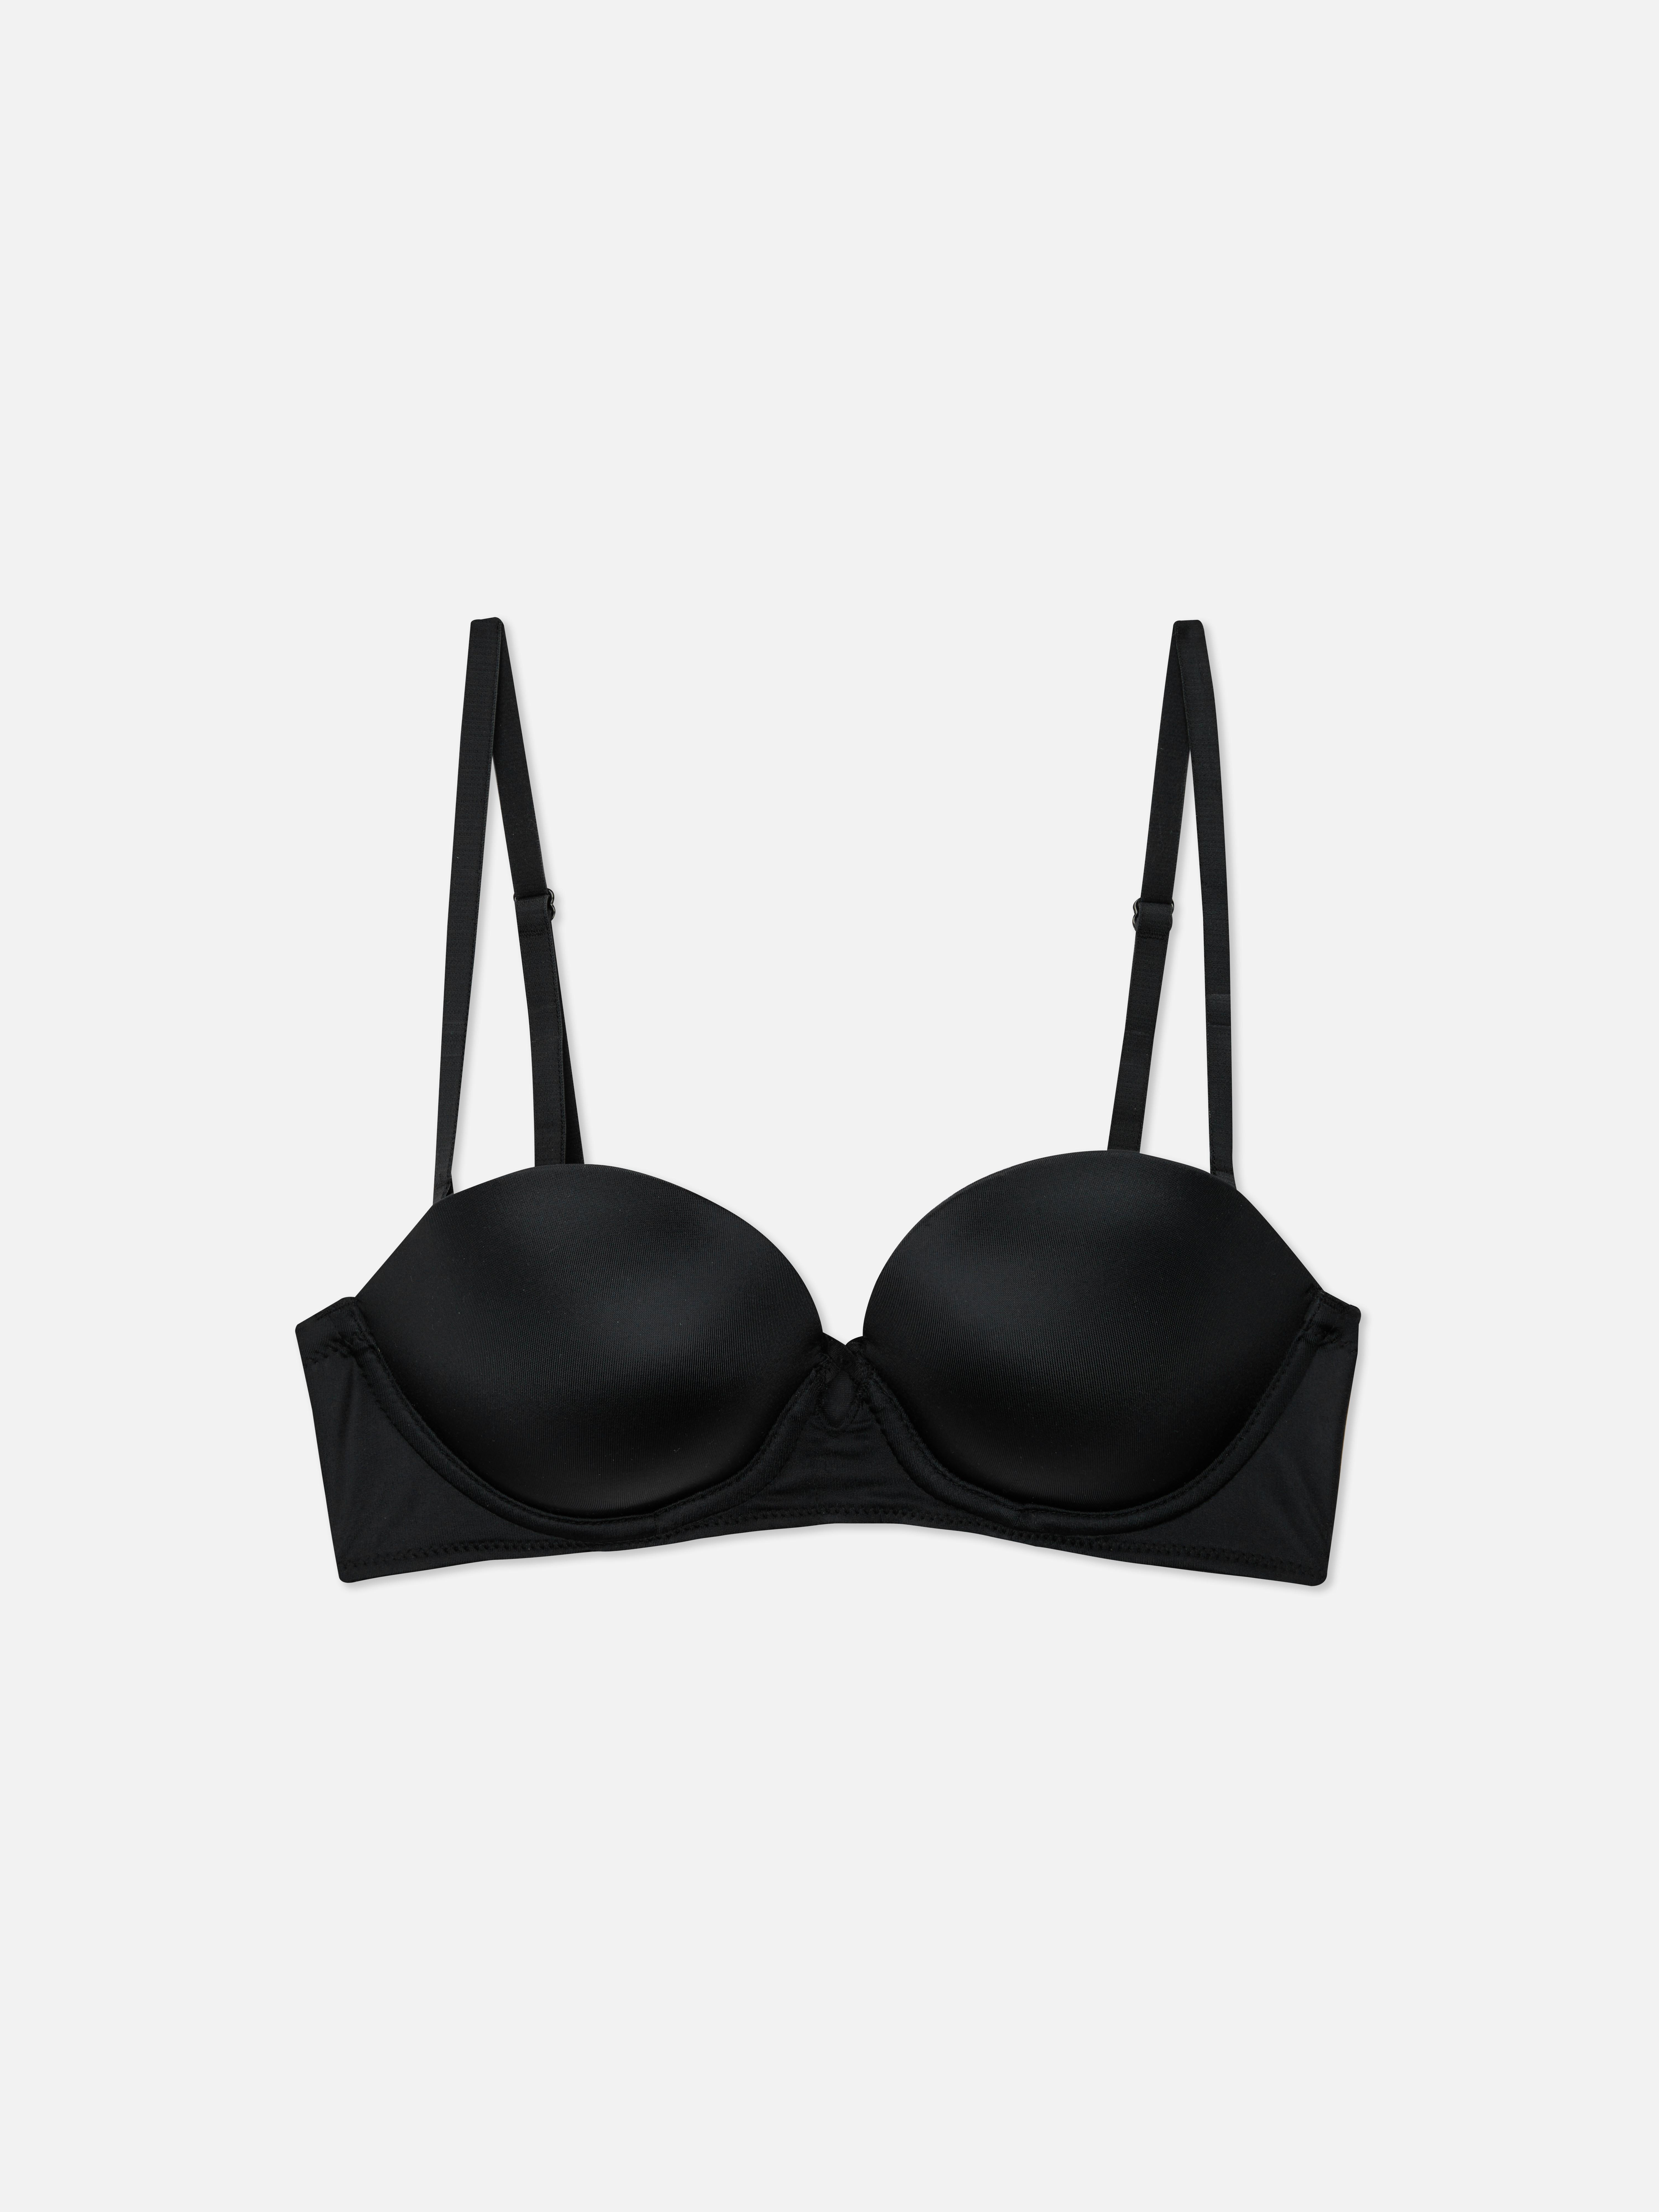 I'm a size 18 with a fuller bust - here are the 8 best strapless